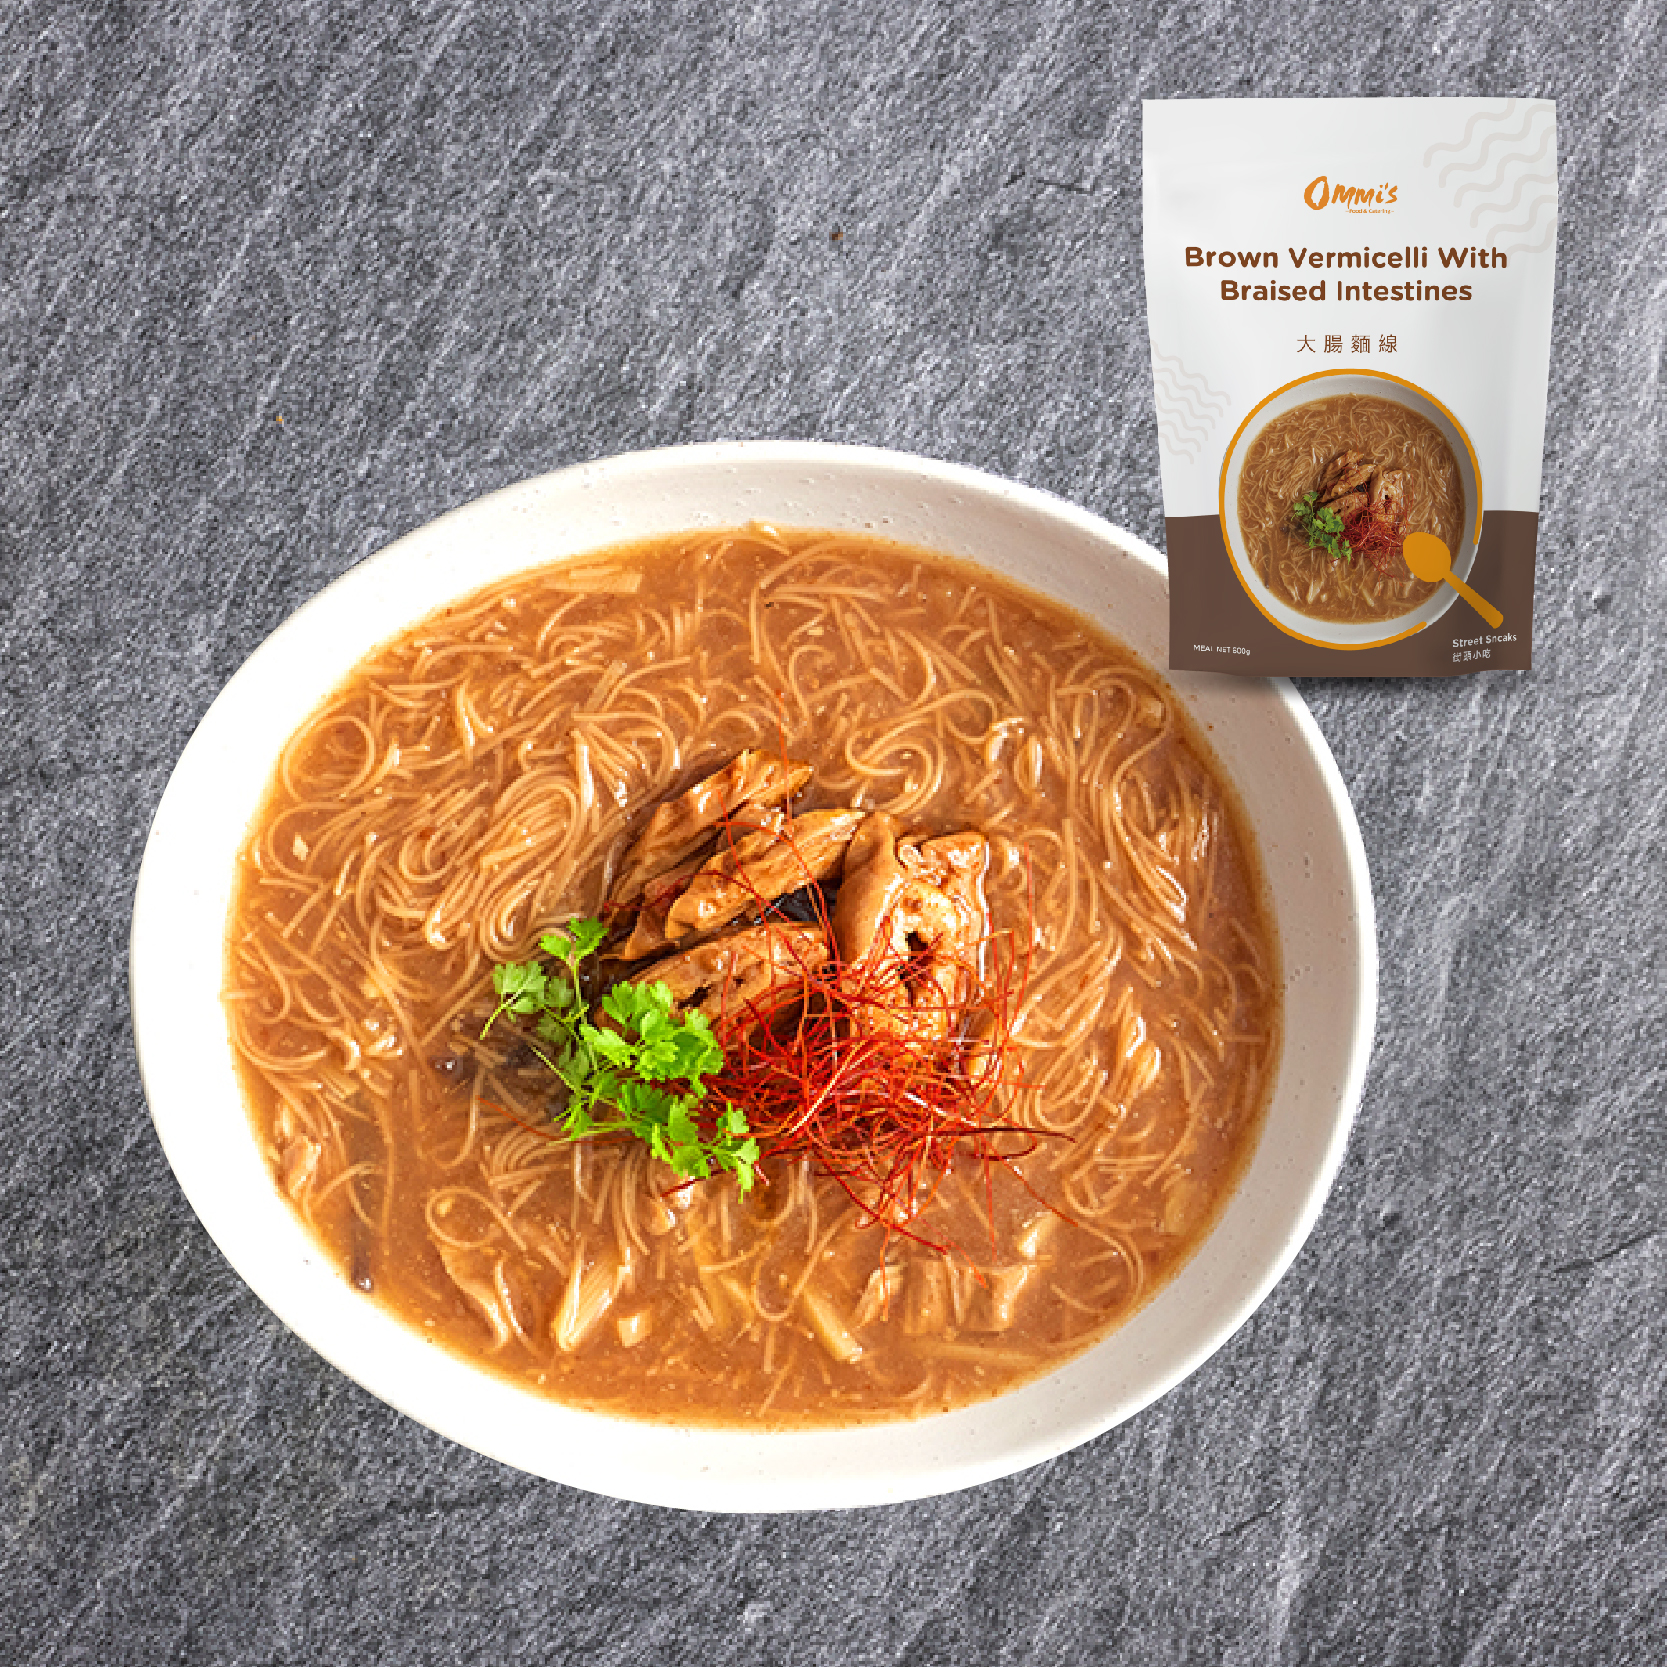 Ommi's Brown Vermicelli With Braised Intestines 600g-eBest-Noodles,Ready Meal